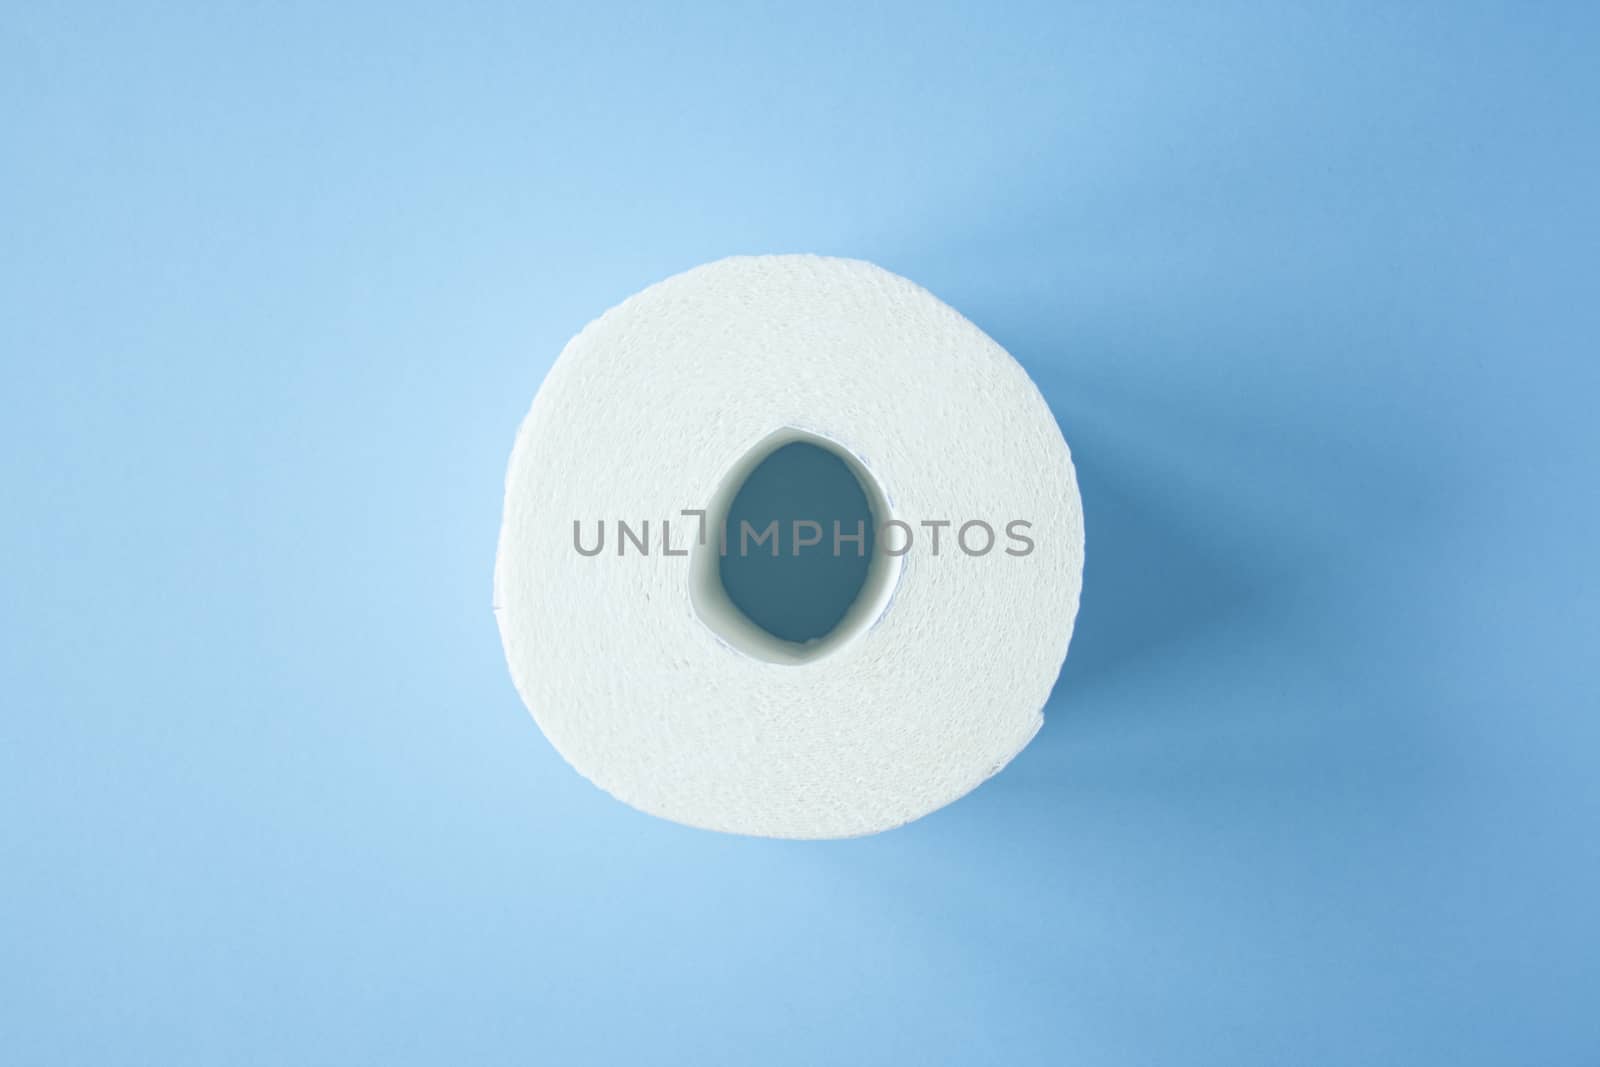 Toilet paper roll on a blue background top view. Toilet paper purchase due to kronavirus concept. Personal hygiene and stopping the spread of the virus. Cleanliness, Hygiene, Sterility